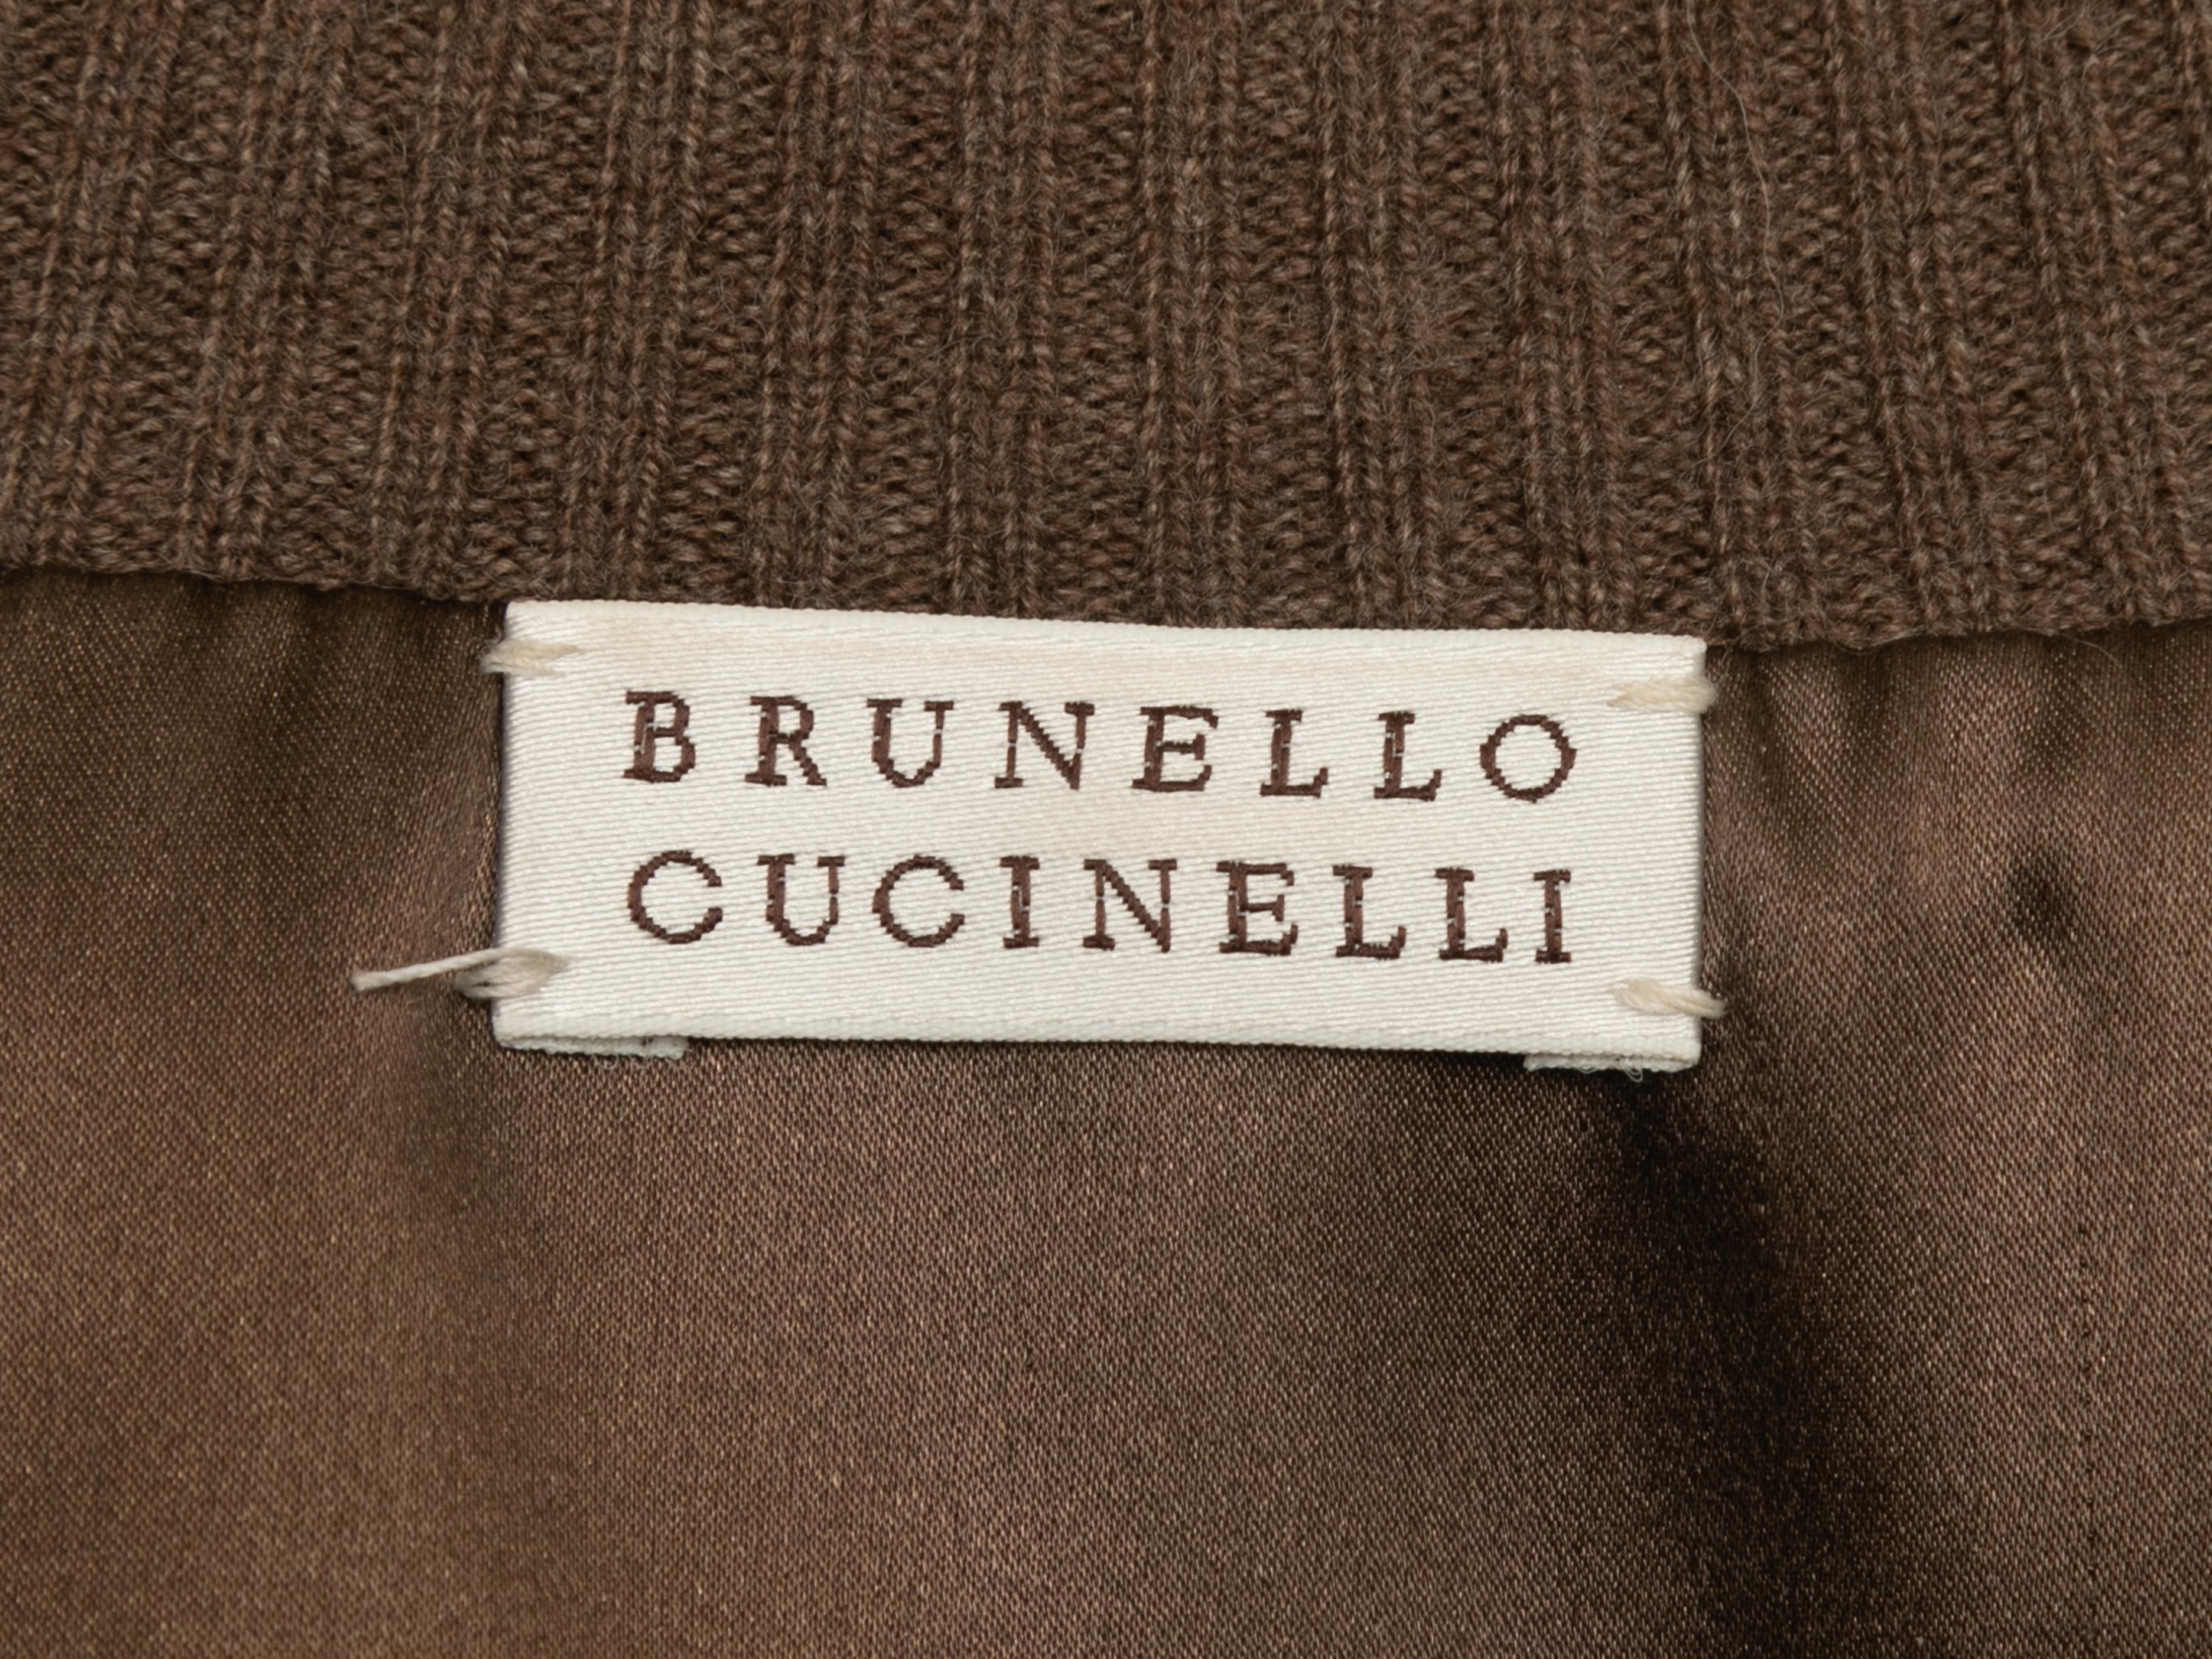 Brown suede and knit layered blazer by Brunello Cucinelli. Notched collar. Button closures at front. 36